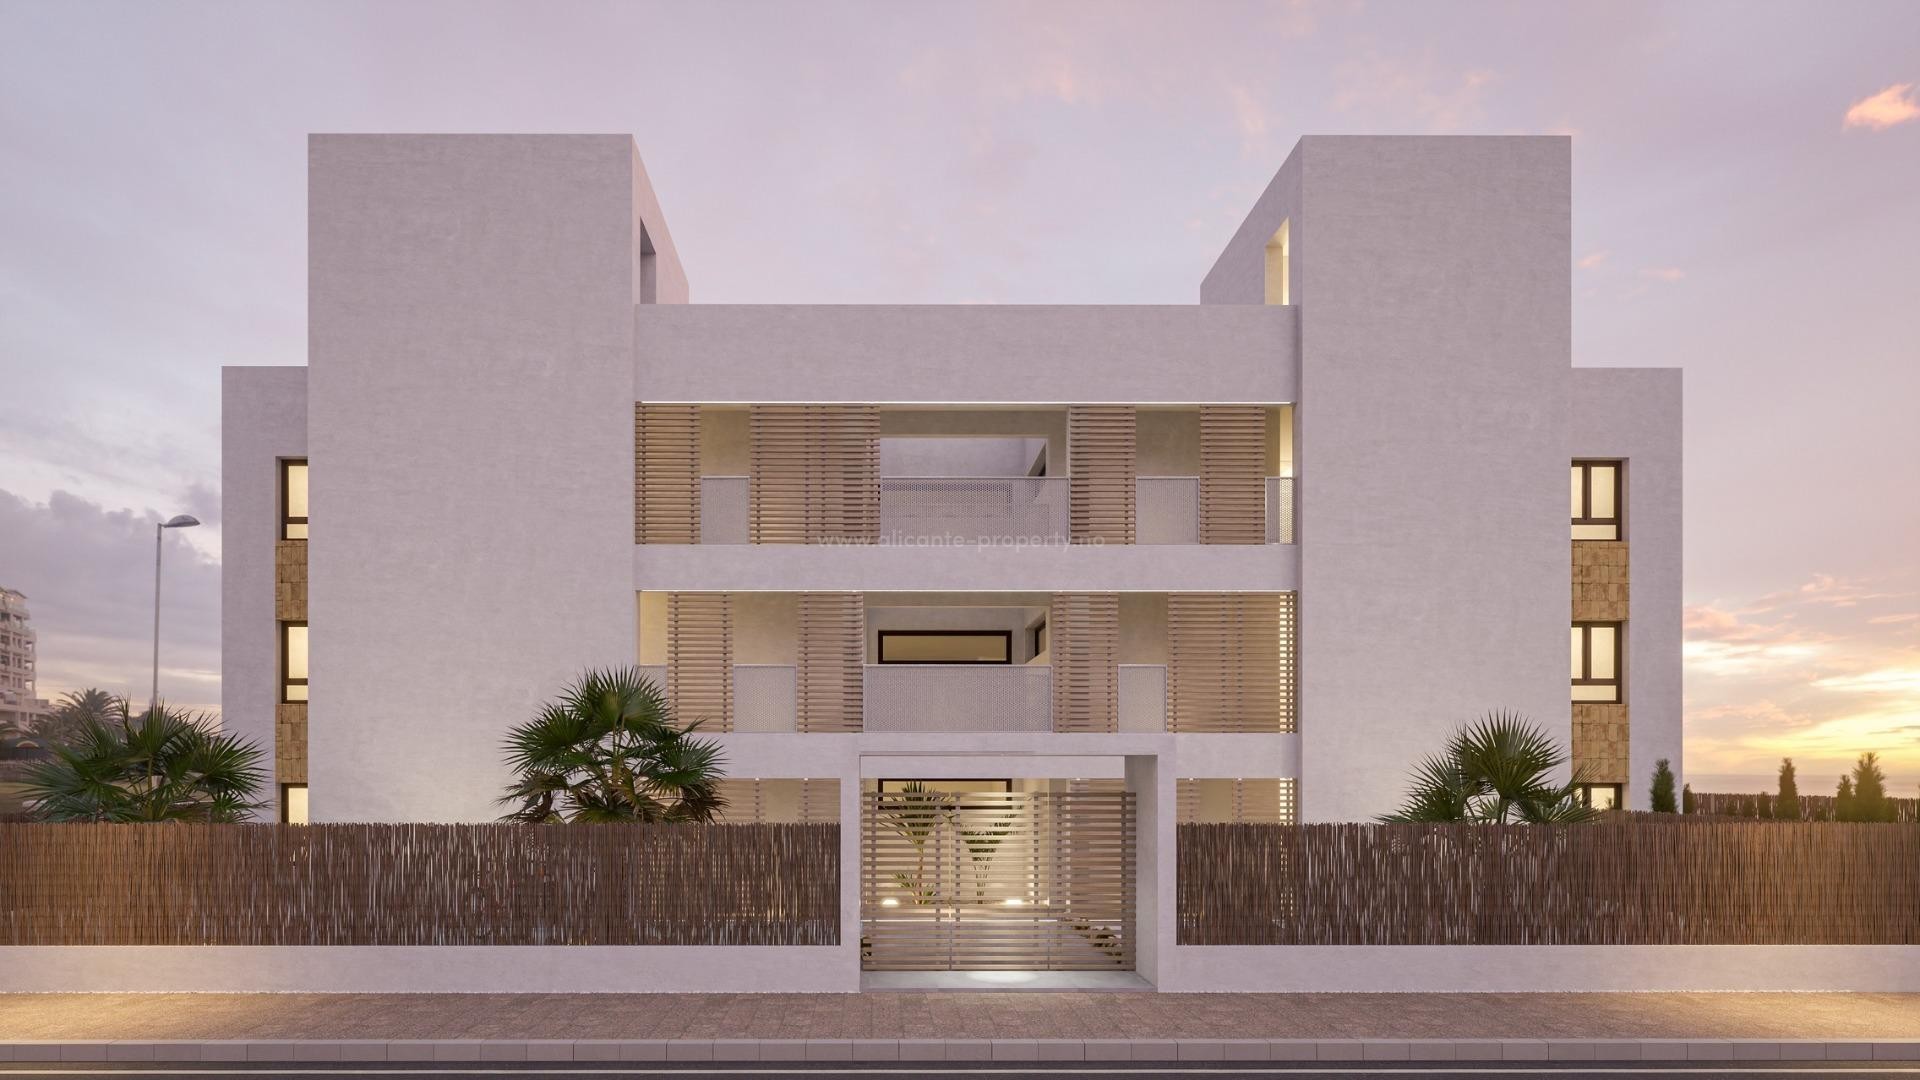 New built modern residential complex in Orihuela Costa, 2 bedrooms, 2 bathrooms, shared pool and garden. Some apartments with spacious sun terrace